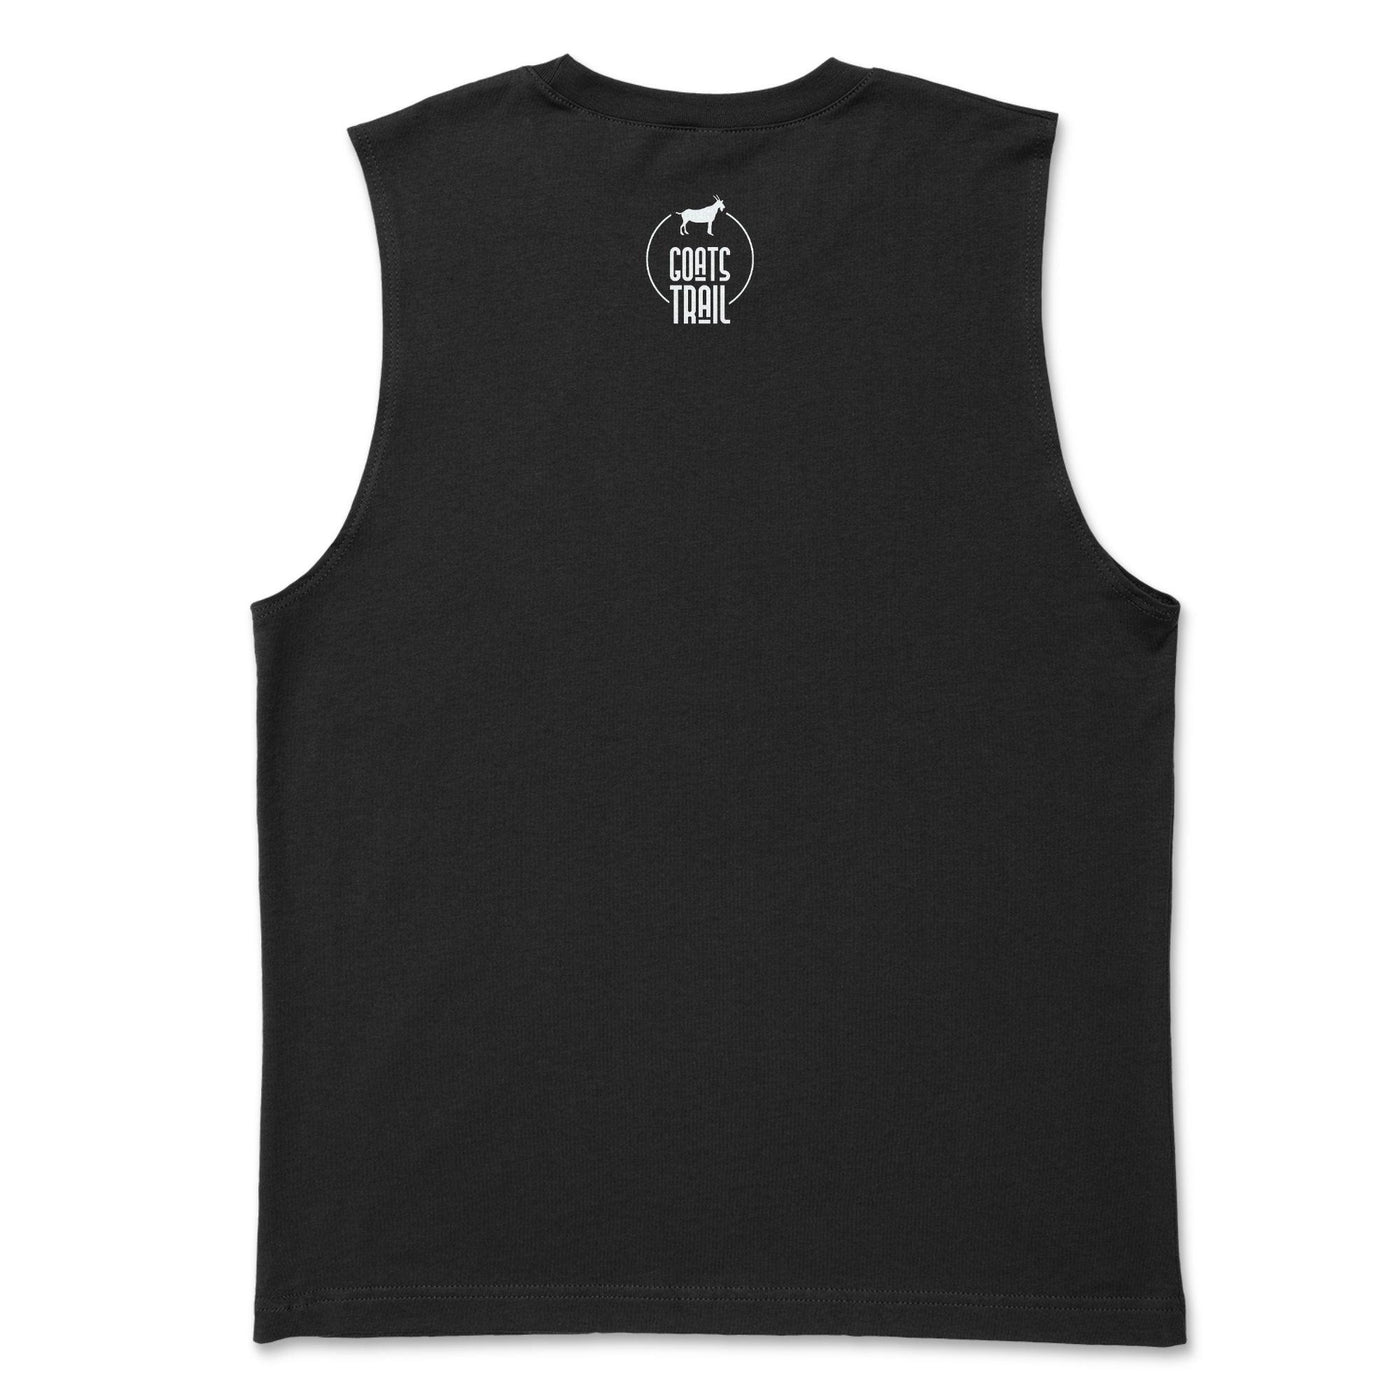 I'd Rather Be Off Road Men's Muscle Tank Top - Goats Trail